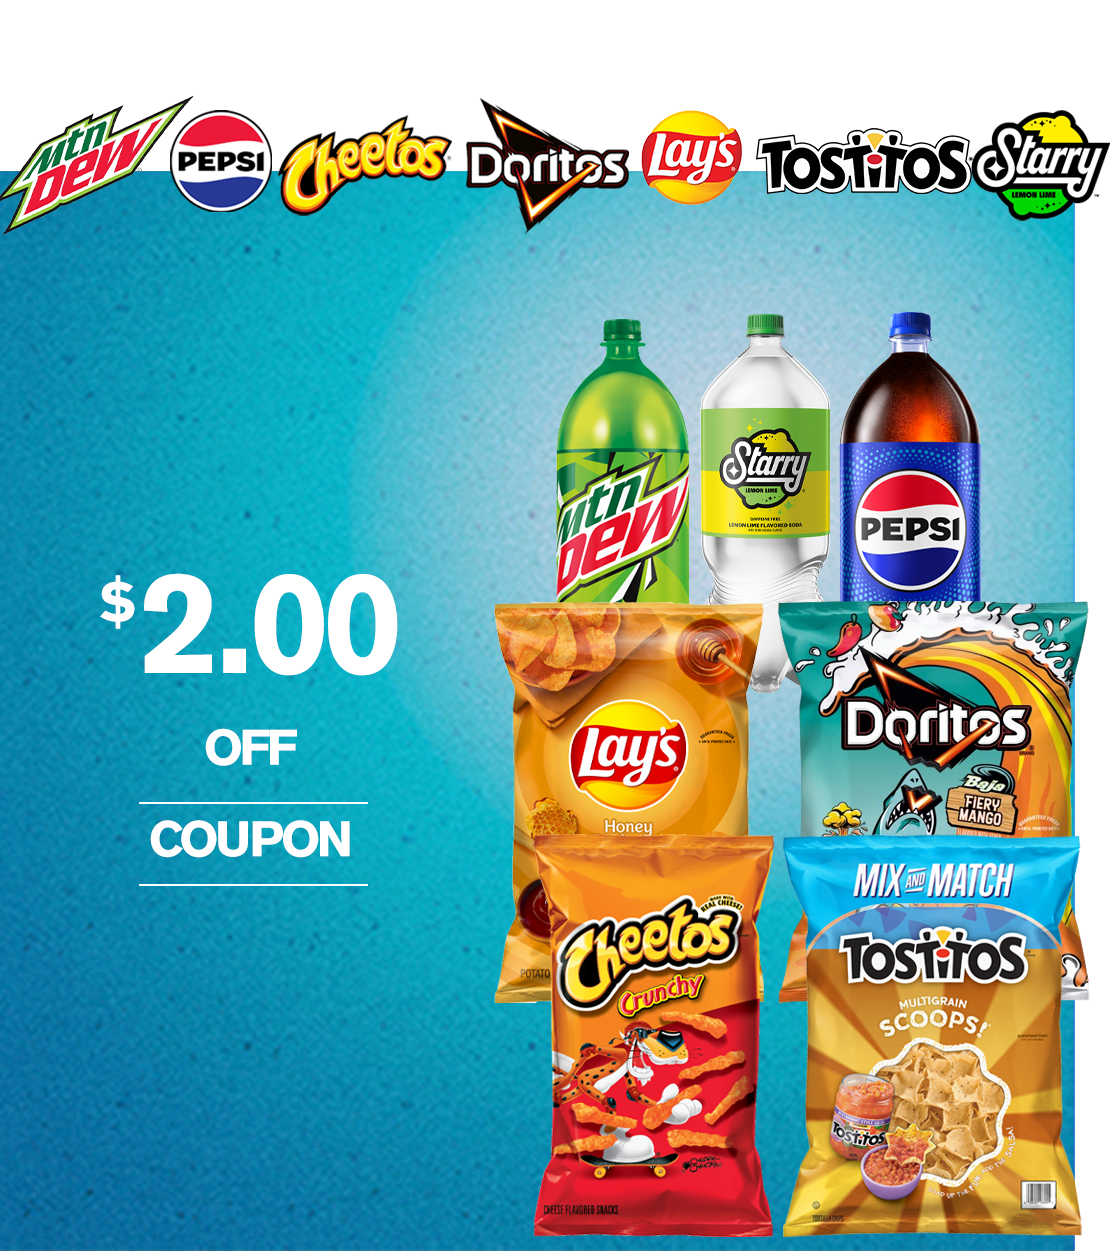 Save $2.00 on Lay's, Doritos, Cheetos, Tostitos, MTN DEW, Starry and Pepsi